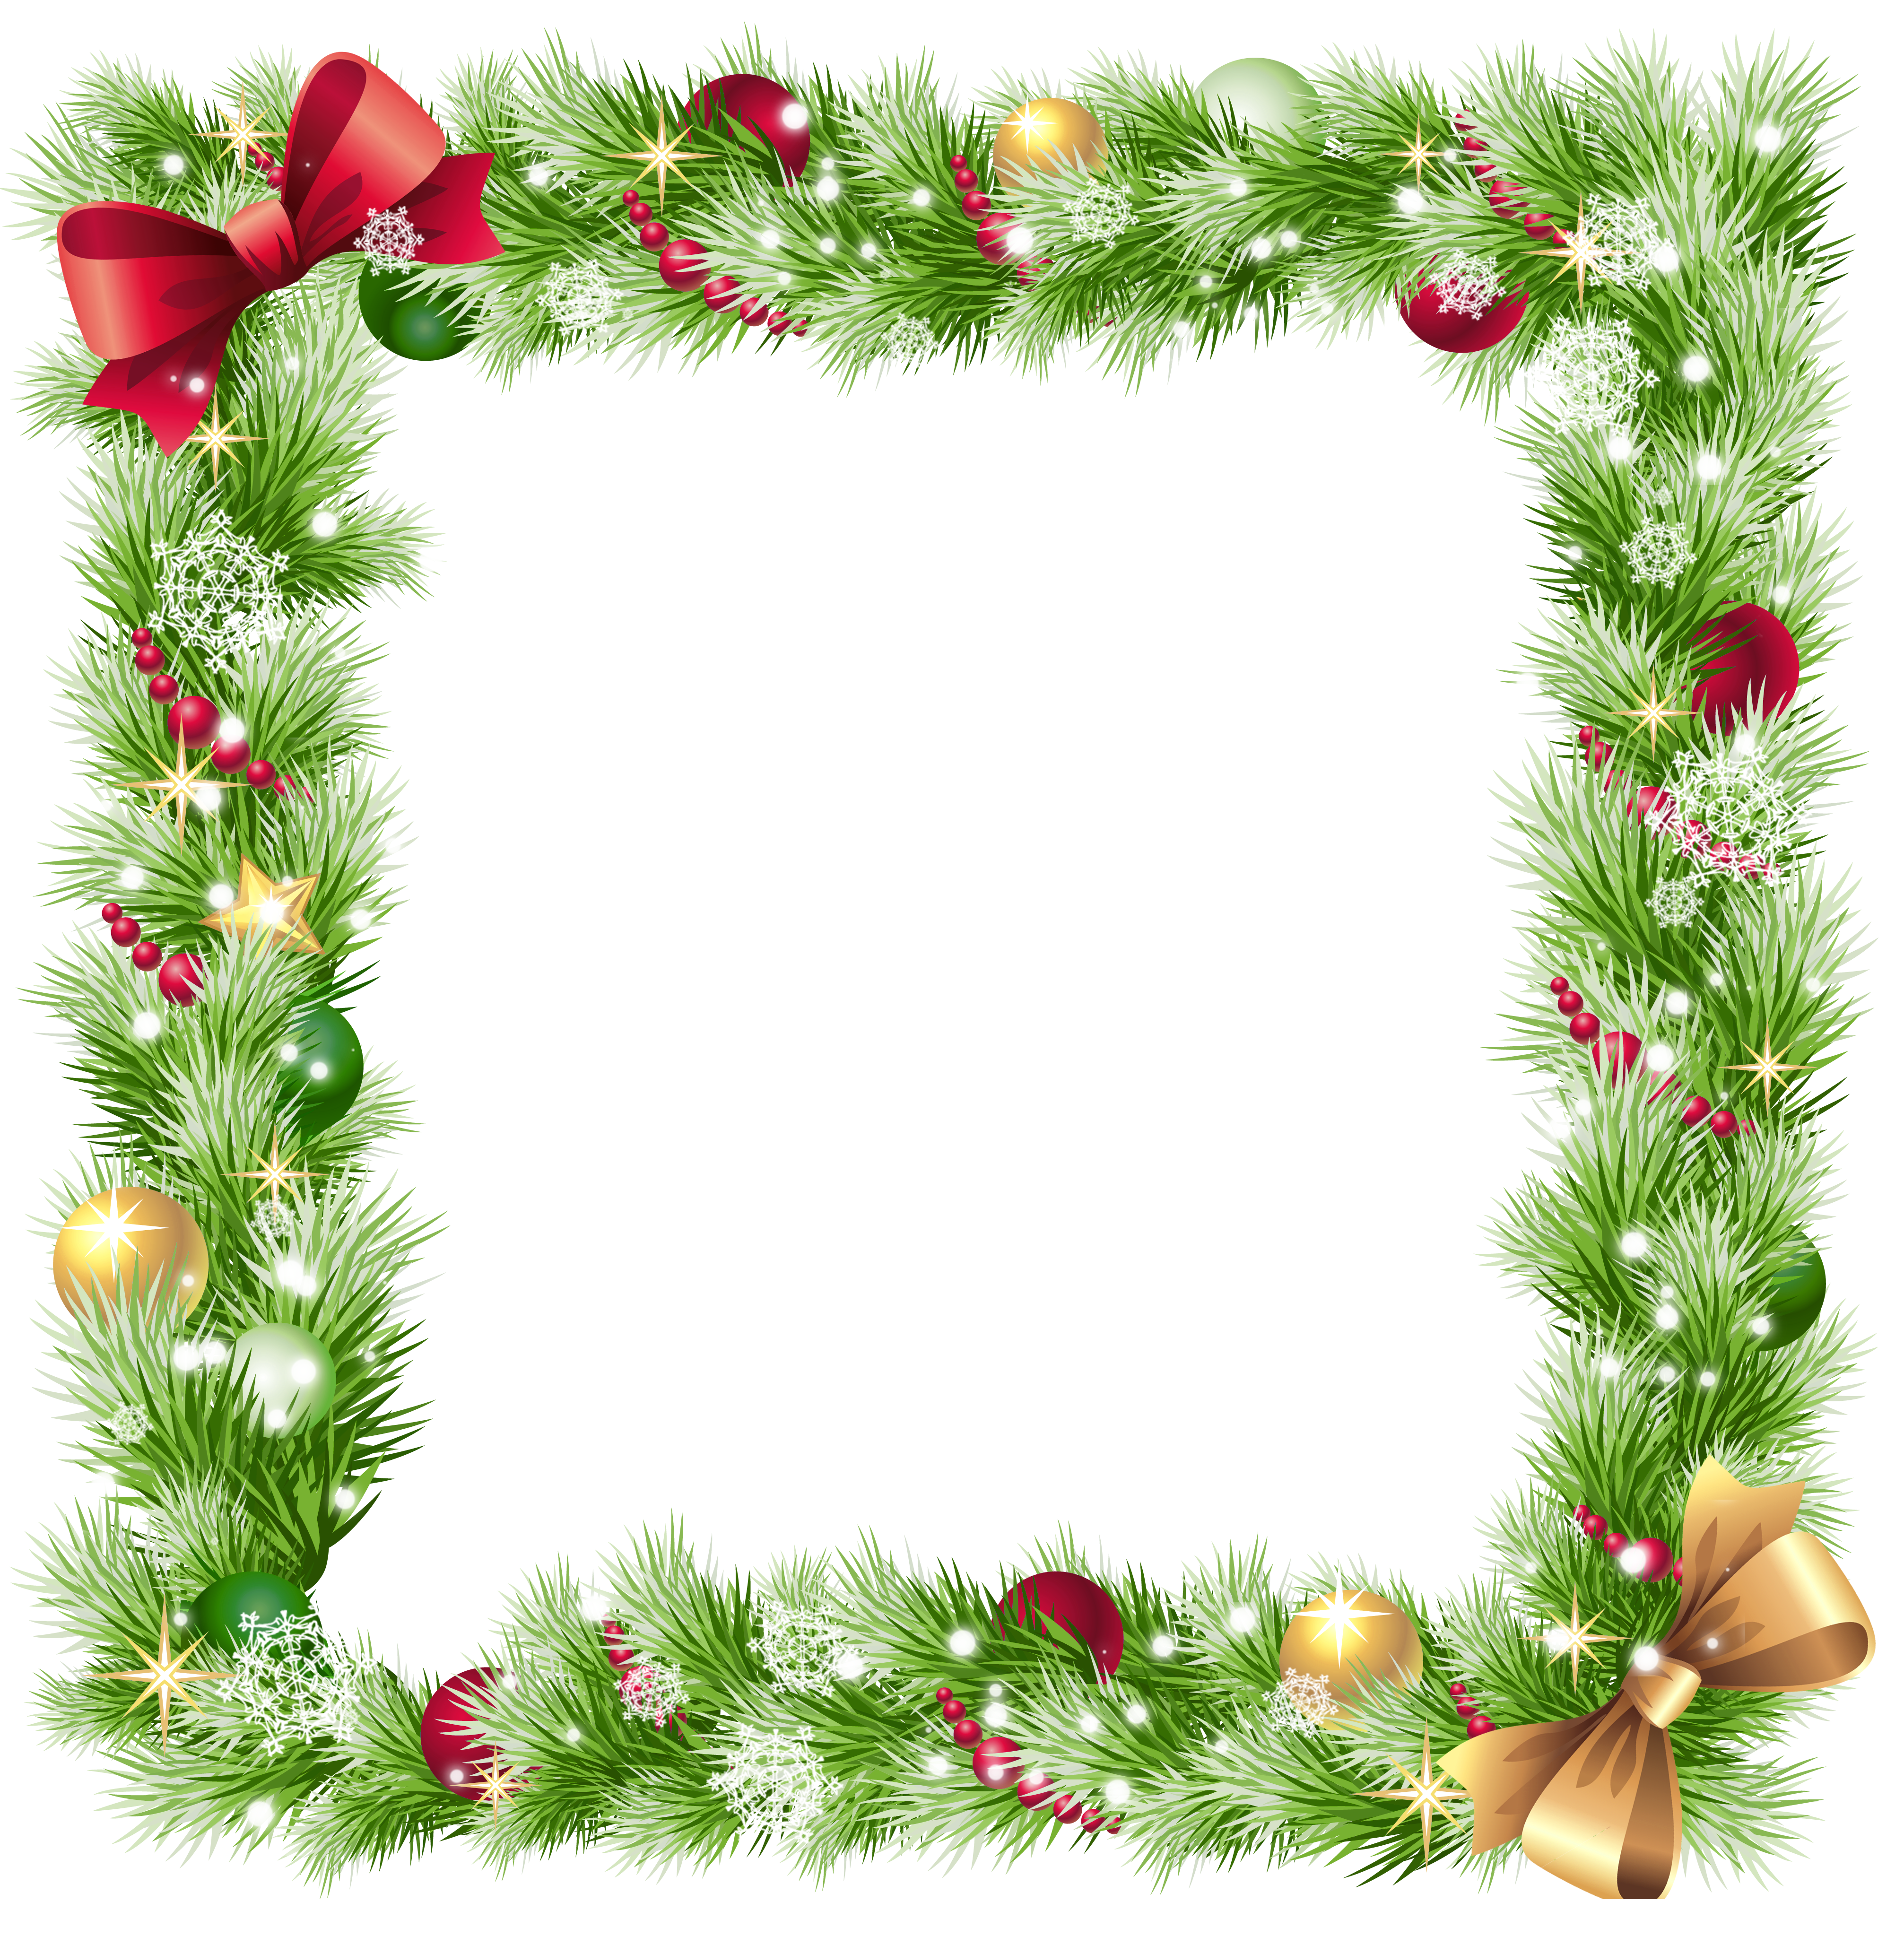 Christmas png with ornaments. Holiday clipart picture frame